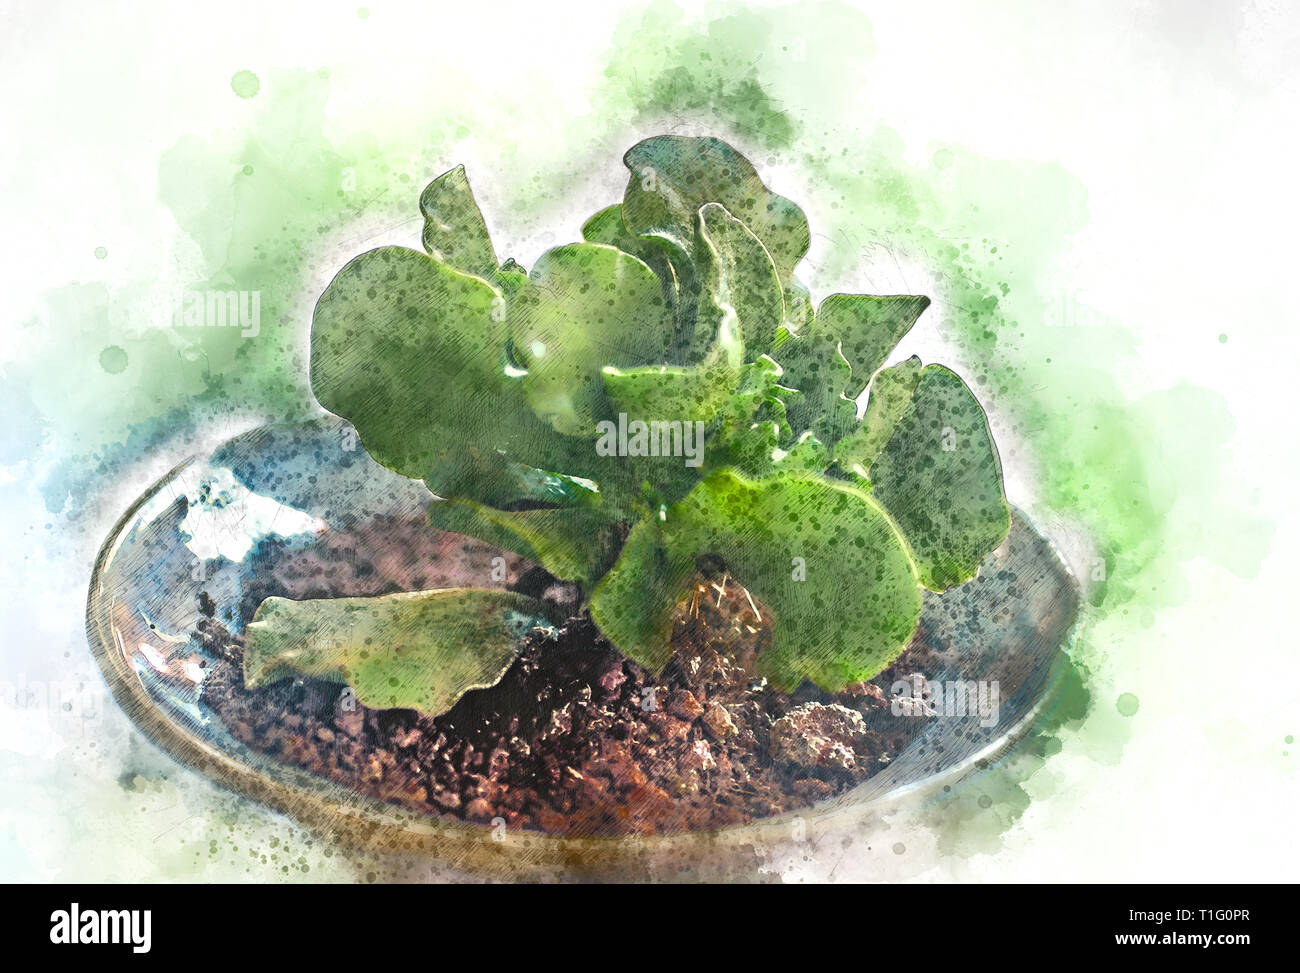 Digitally enhanced image of a potted Adromischus cristatus Stock Photo